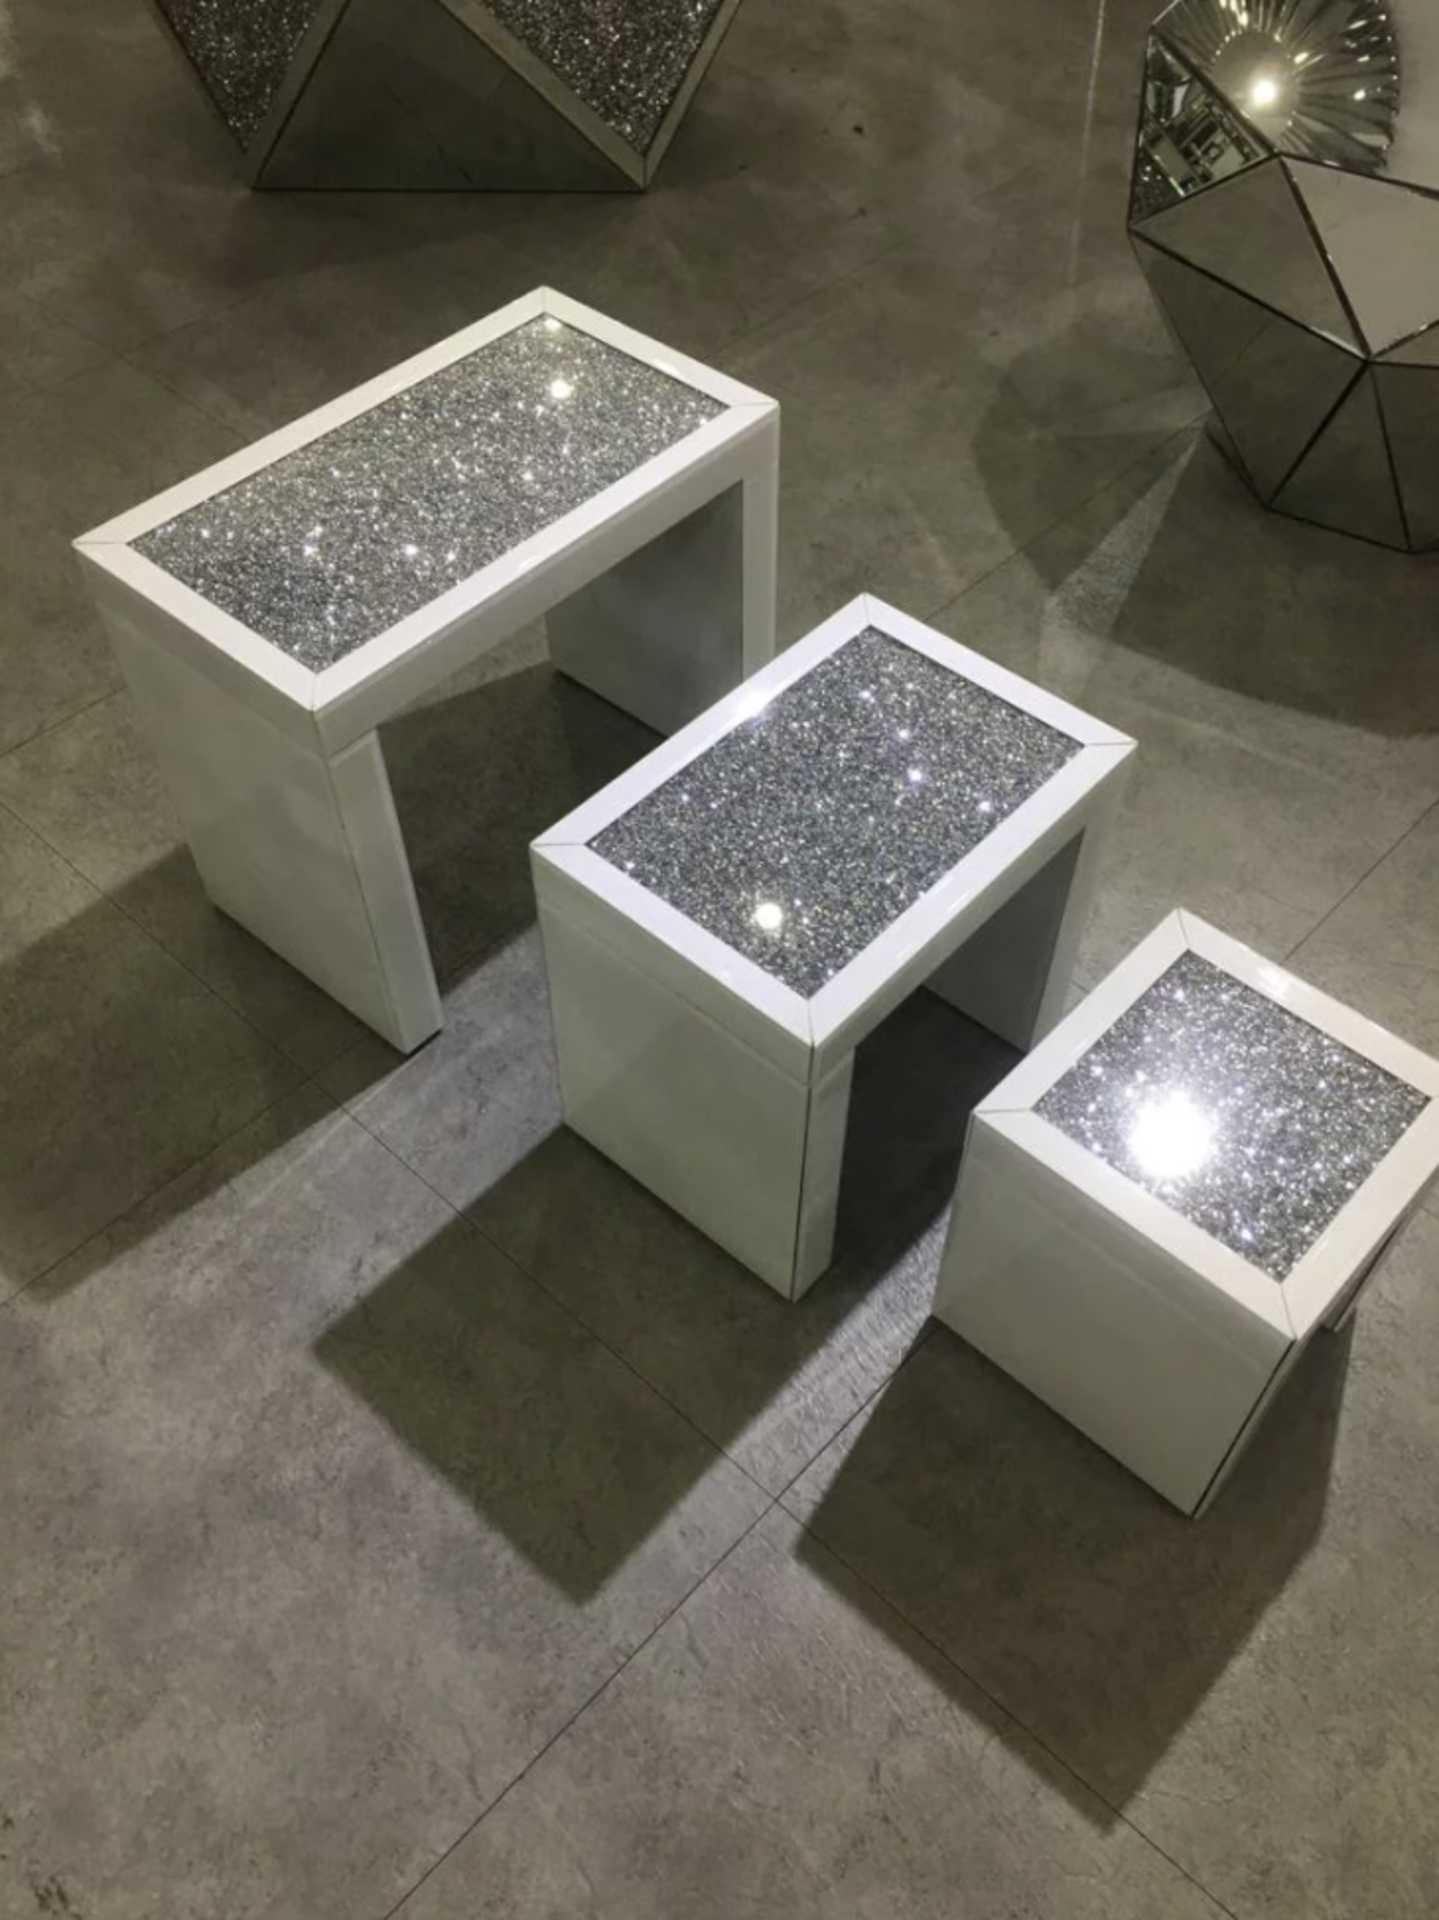 BRAND NEW BOXED WHITE MIRROR CRUSH NEST OF 3 TABLES - 55X30.5X45CM (BOX 66X41X56CM, 37KG) - Image 2 of 2